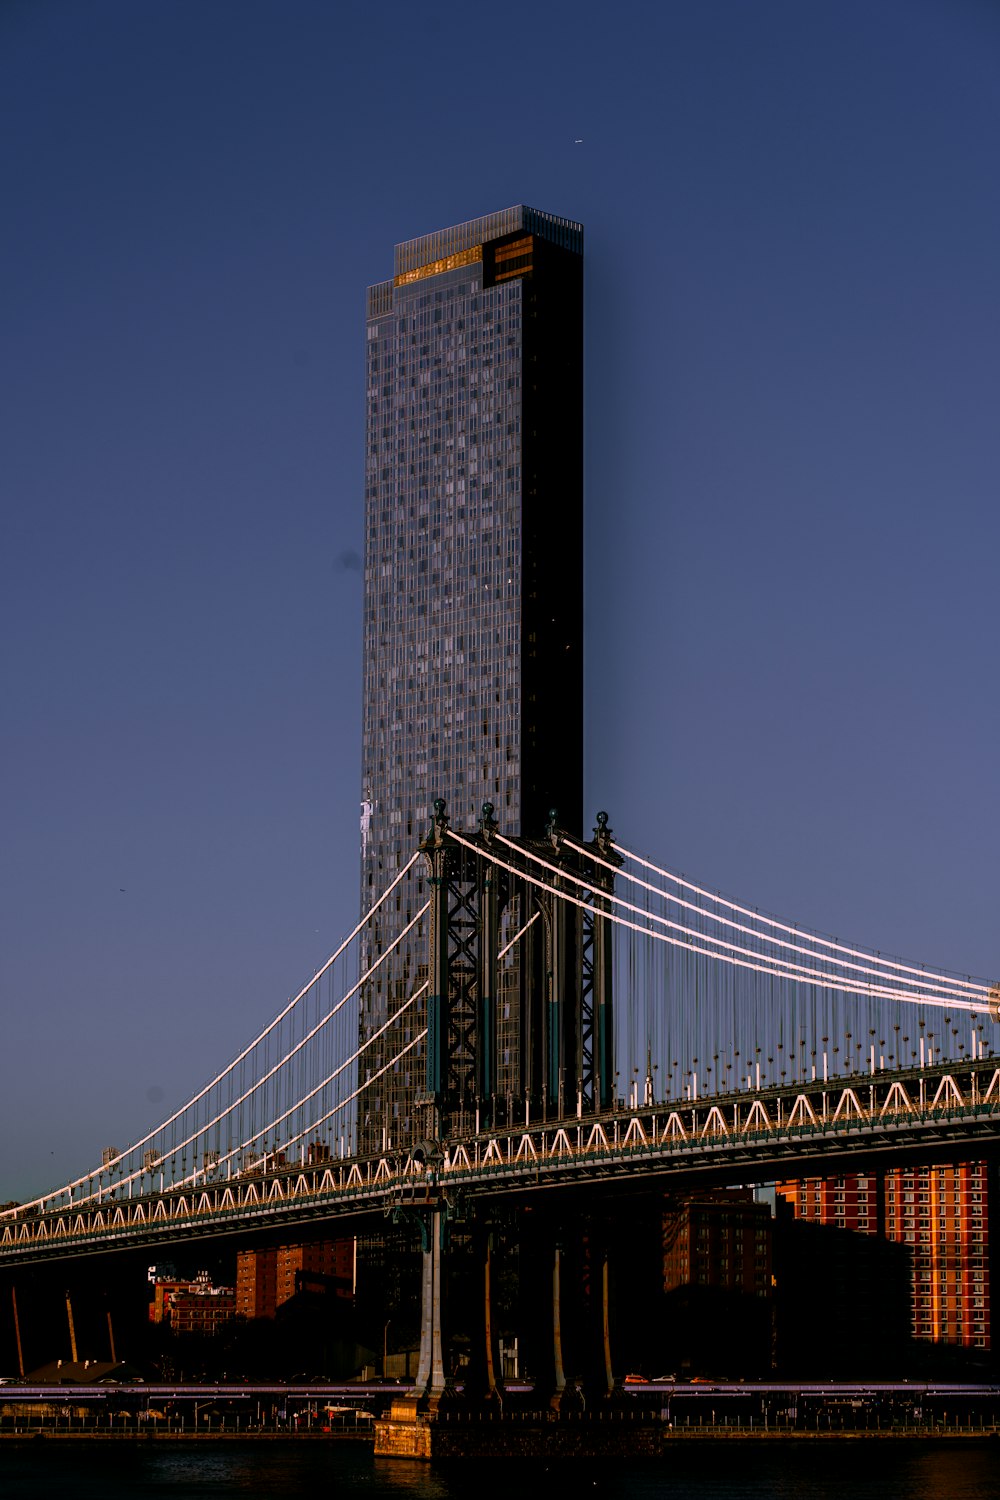 a large bridge crossing over a river next to a tall building